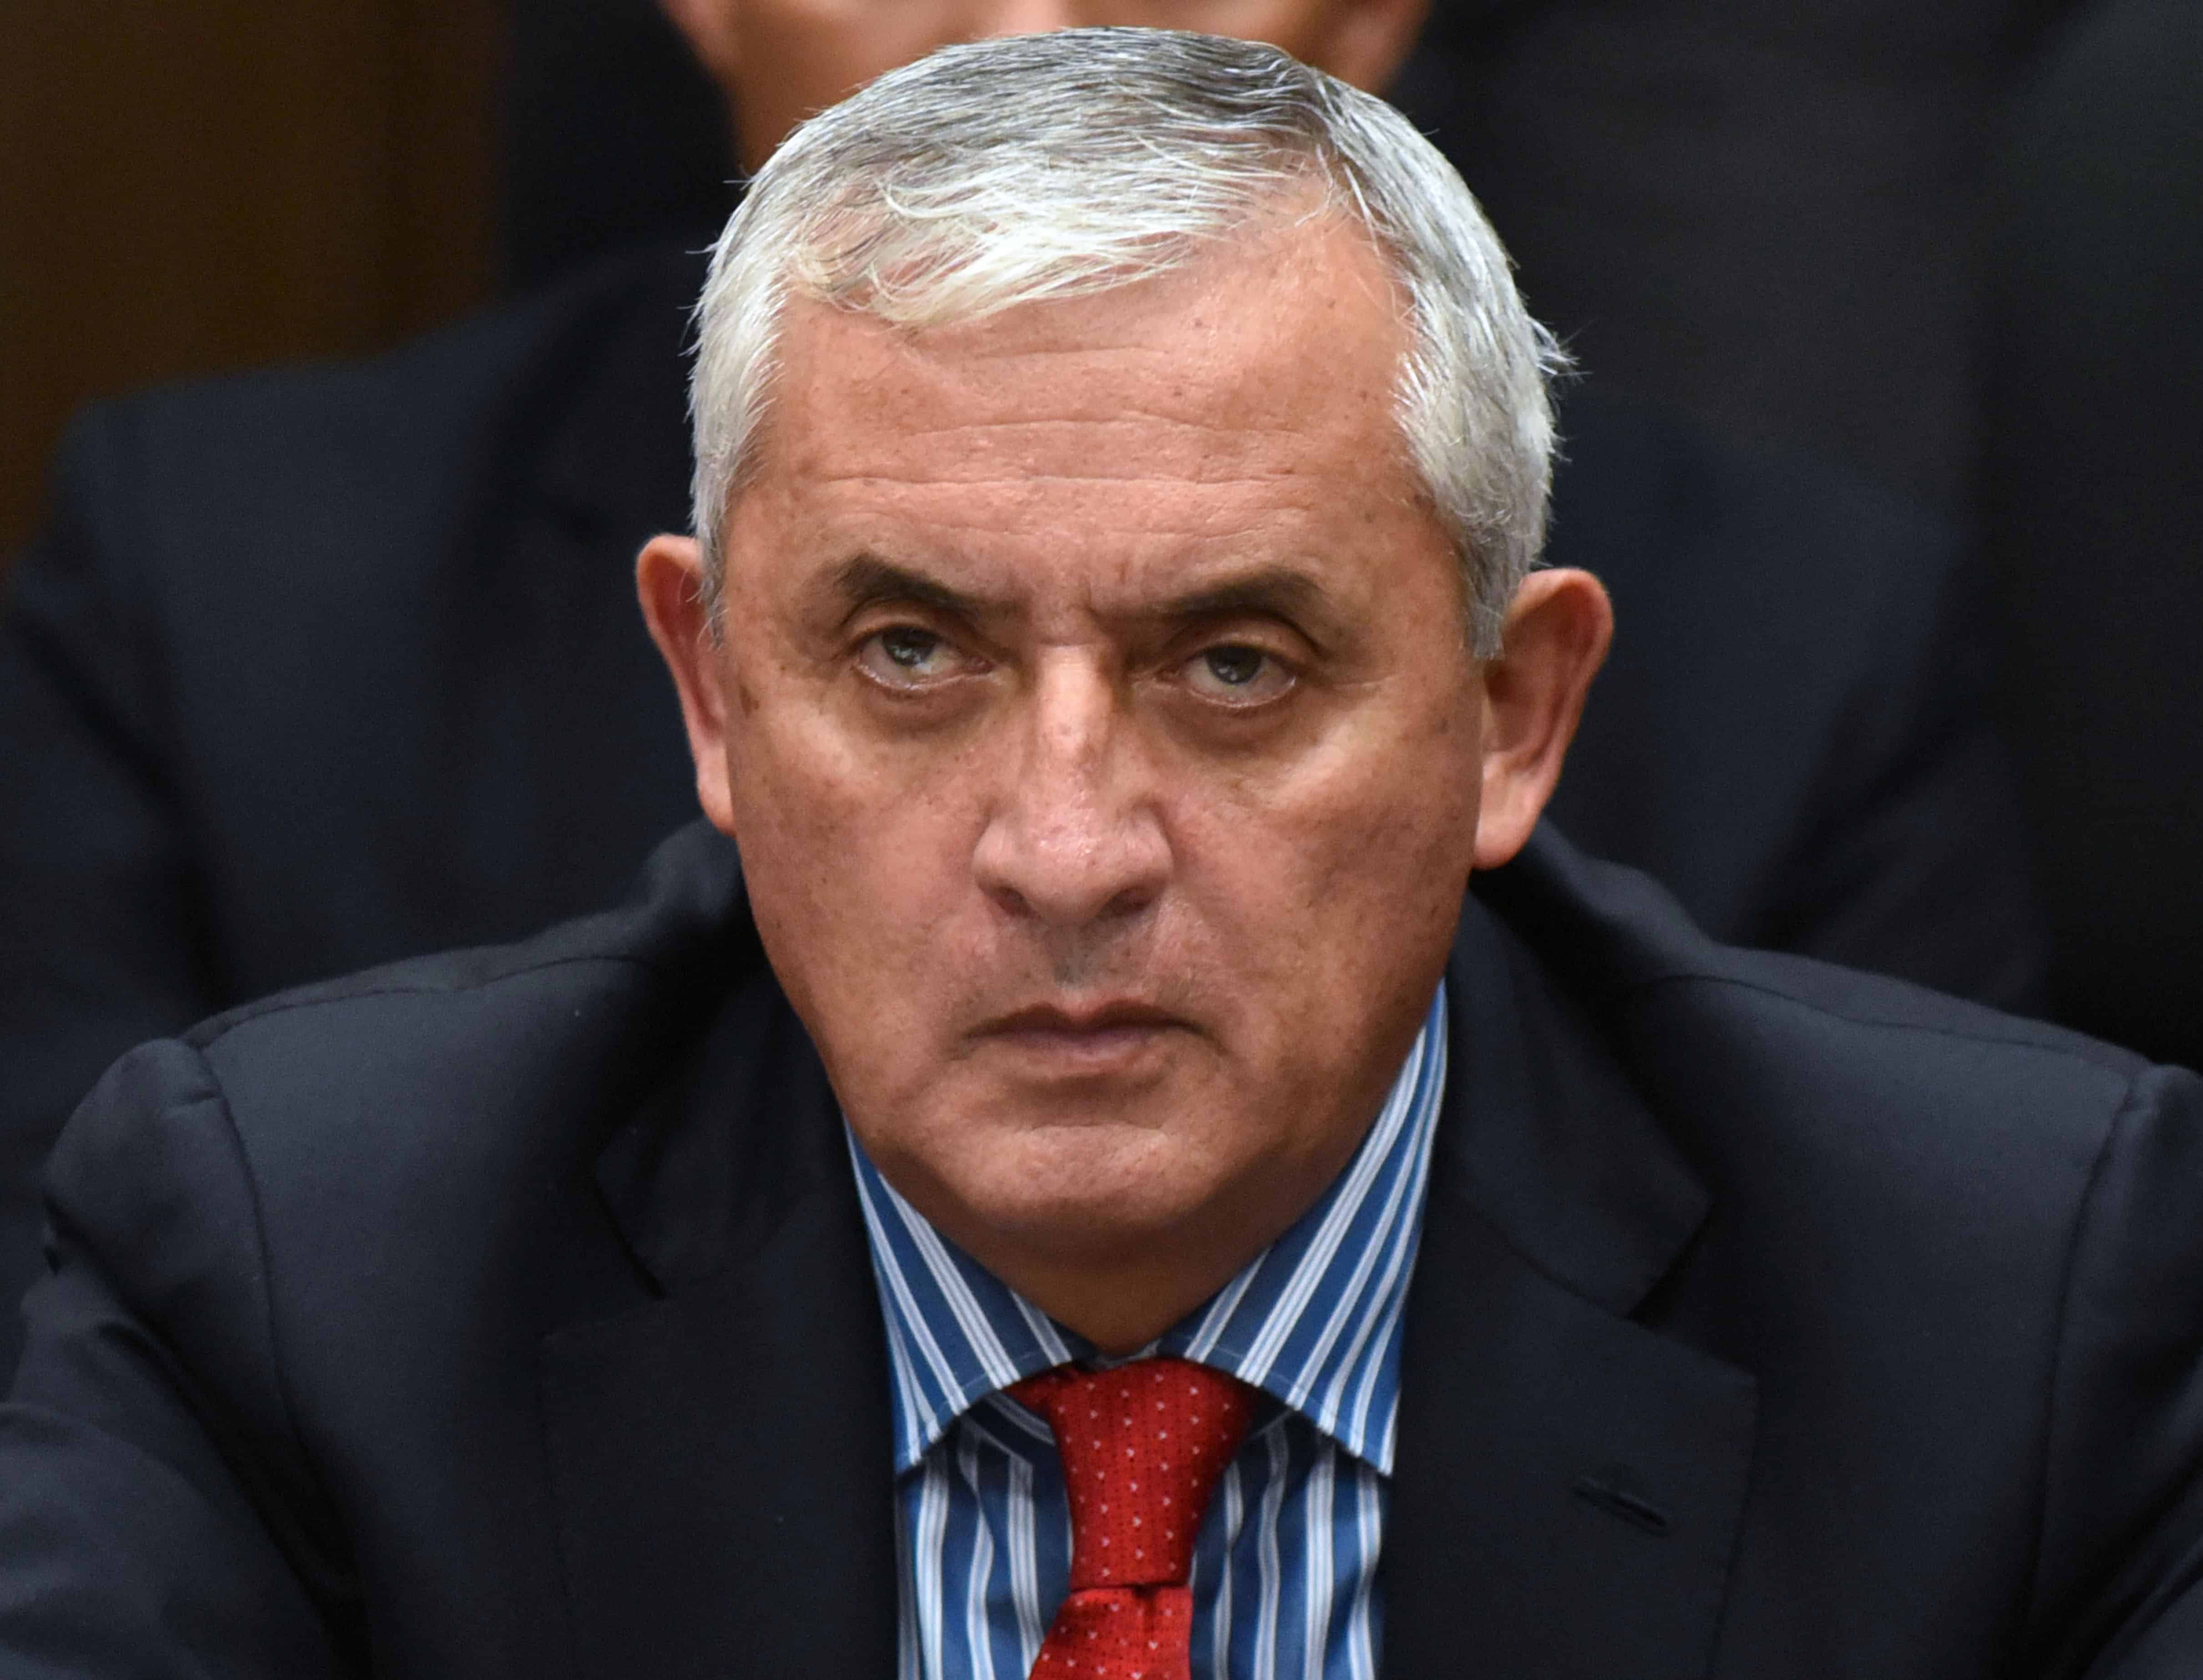 Guatemalan ex-President Otto Pérez Molina attends a hearing at the Supreme Court in Guatemala City on Sept. 3, 2015.